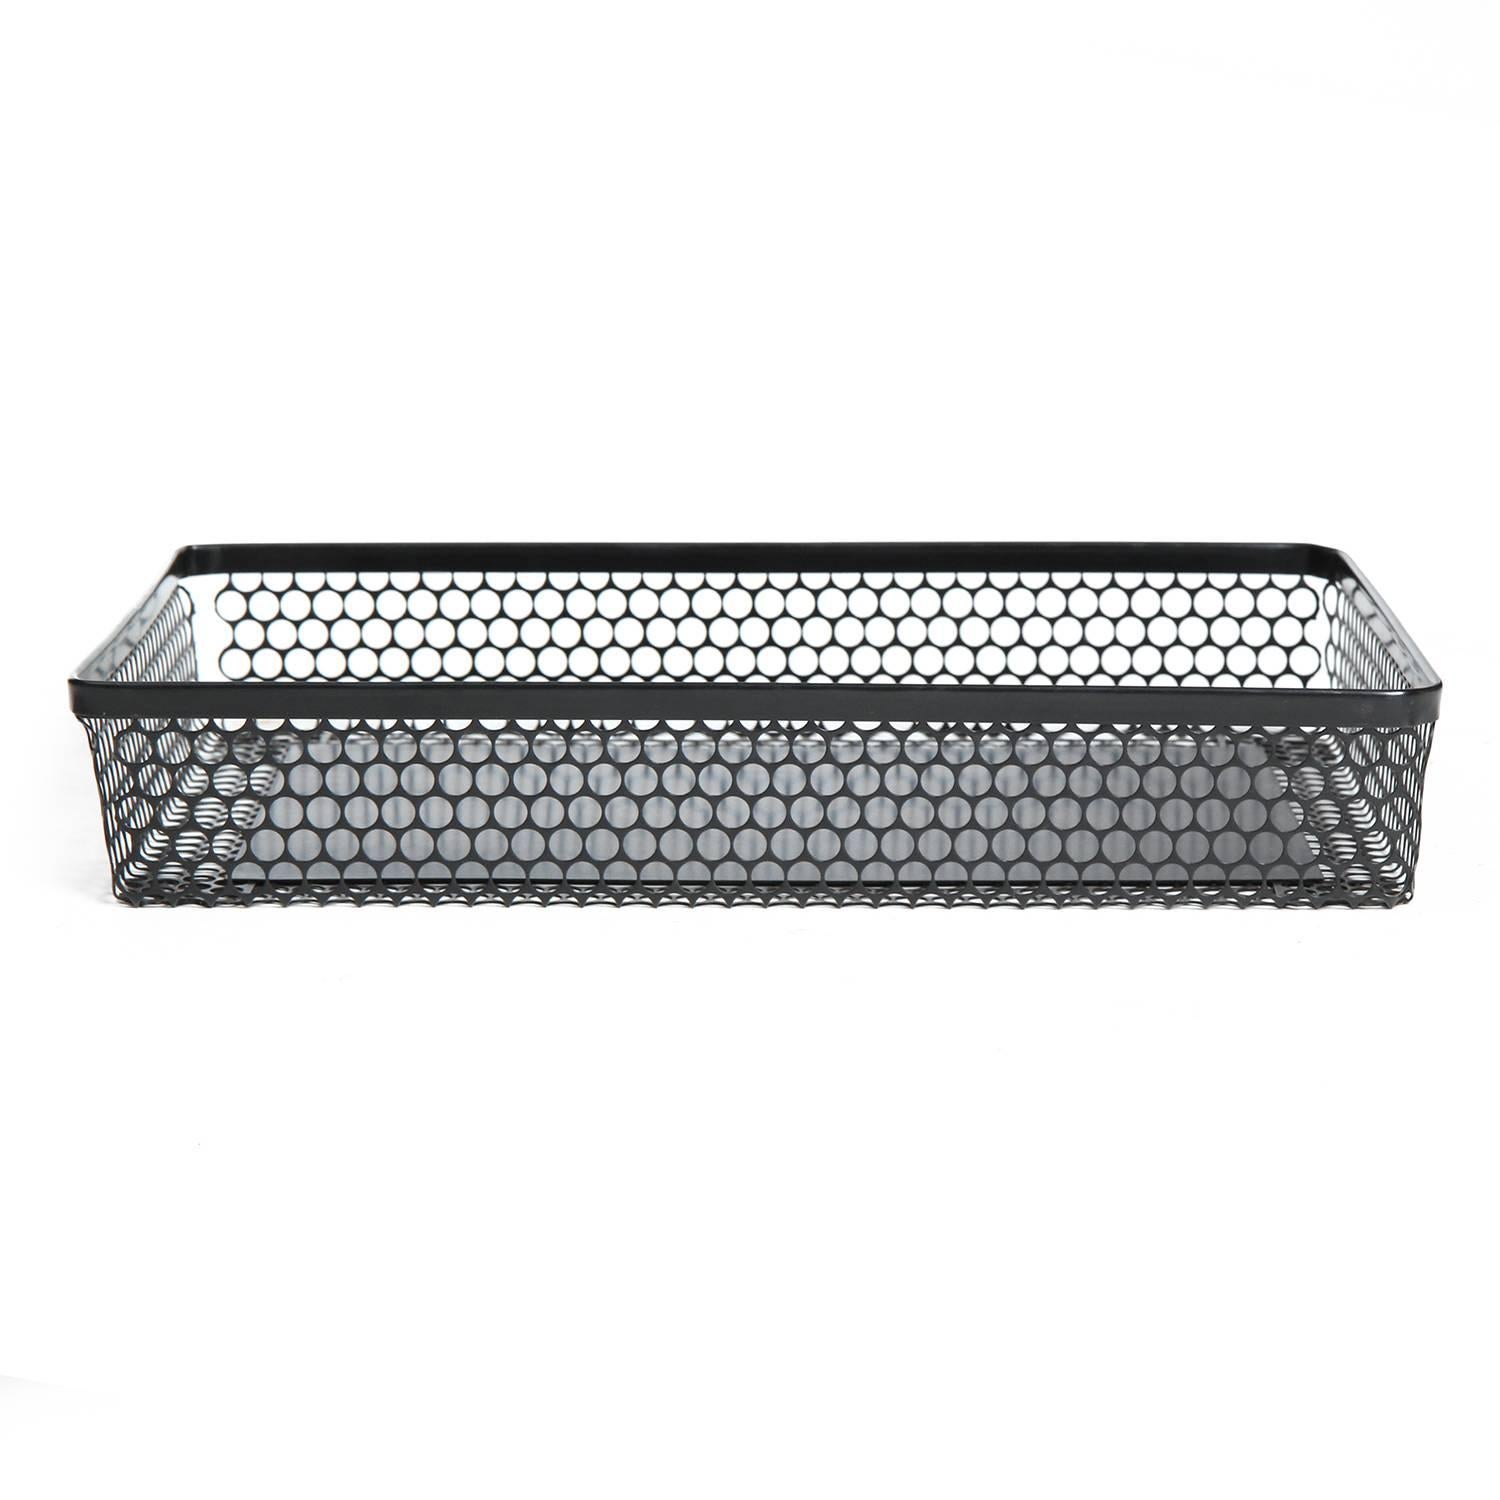 A fine tray crafted of stamped and perforated steel, having a rich  patina.